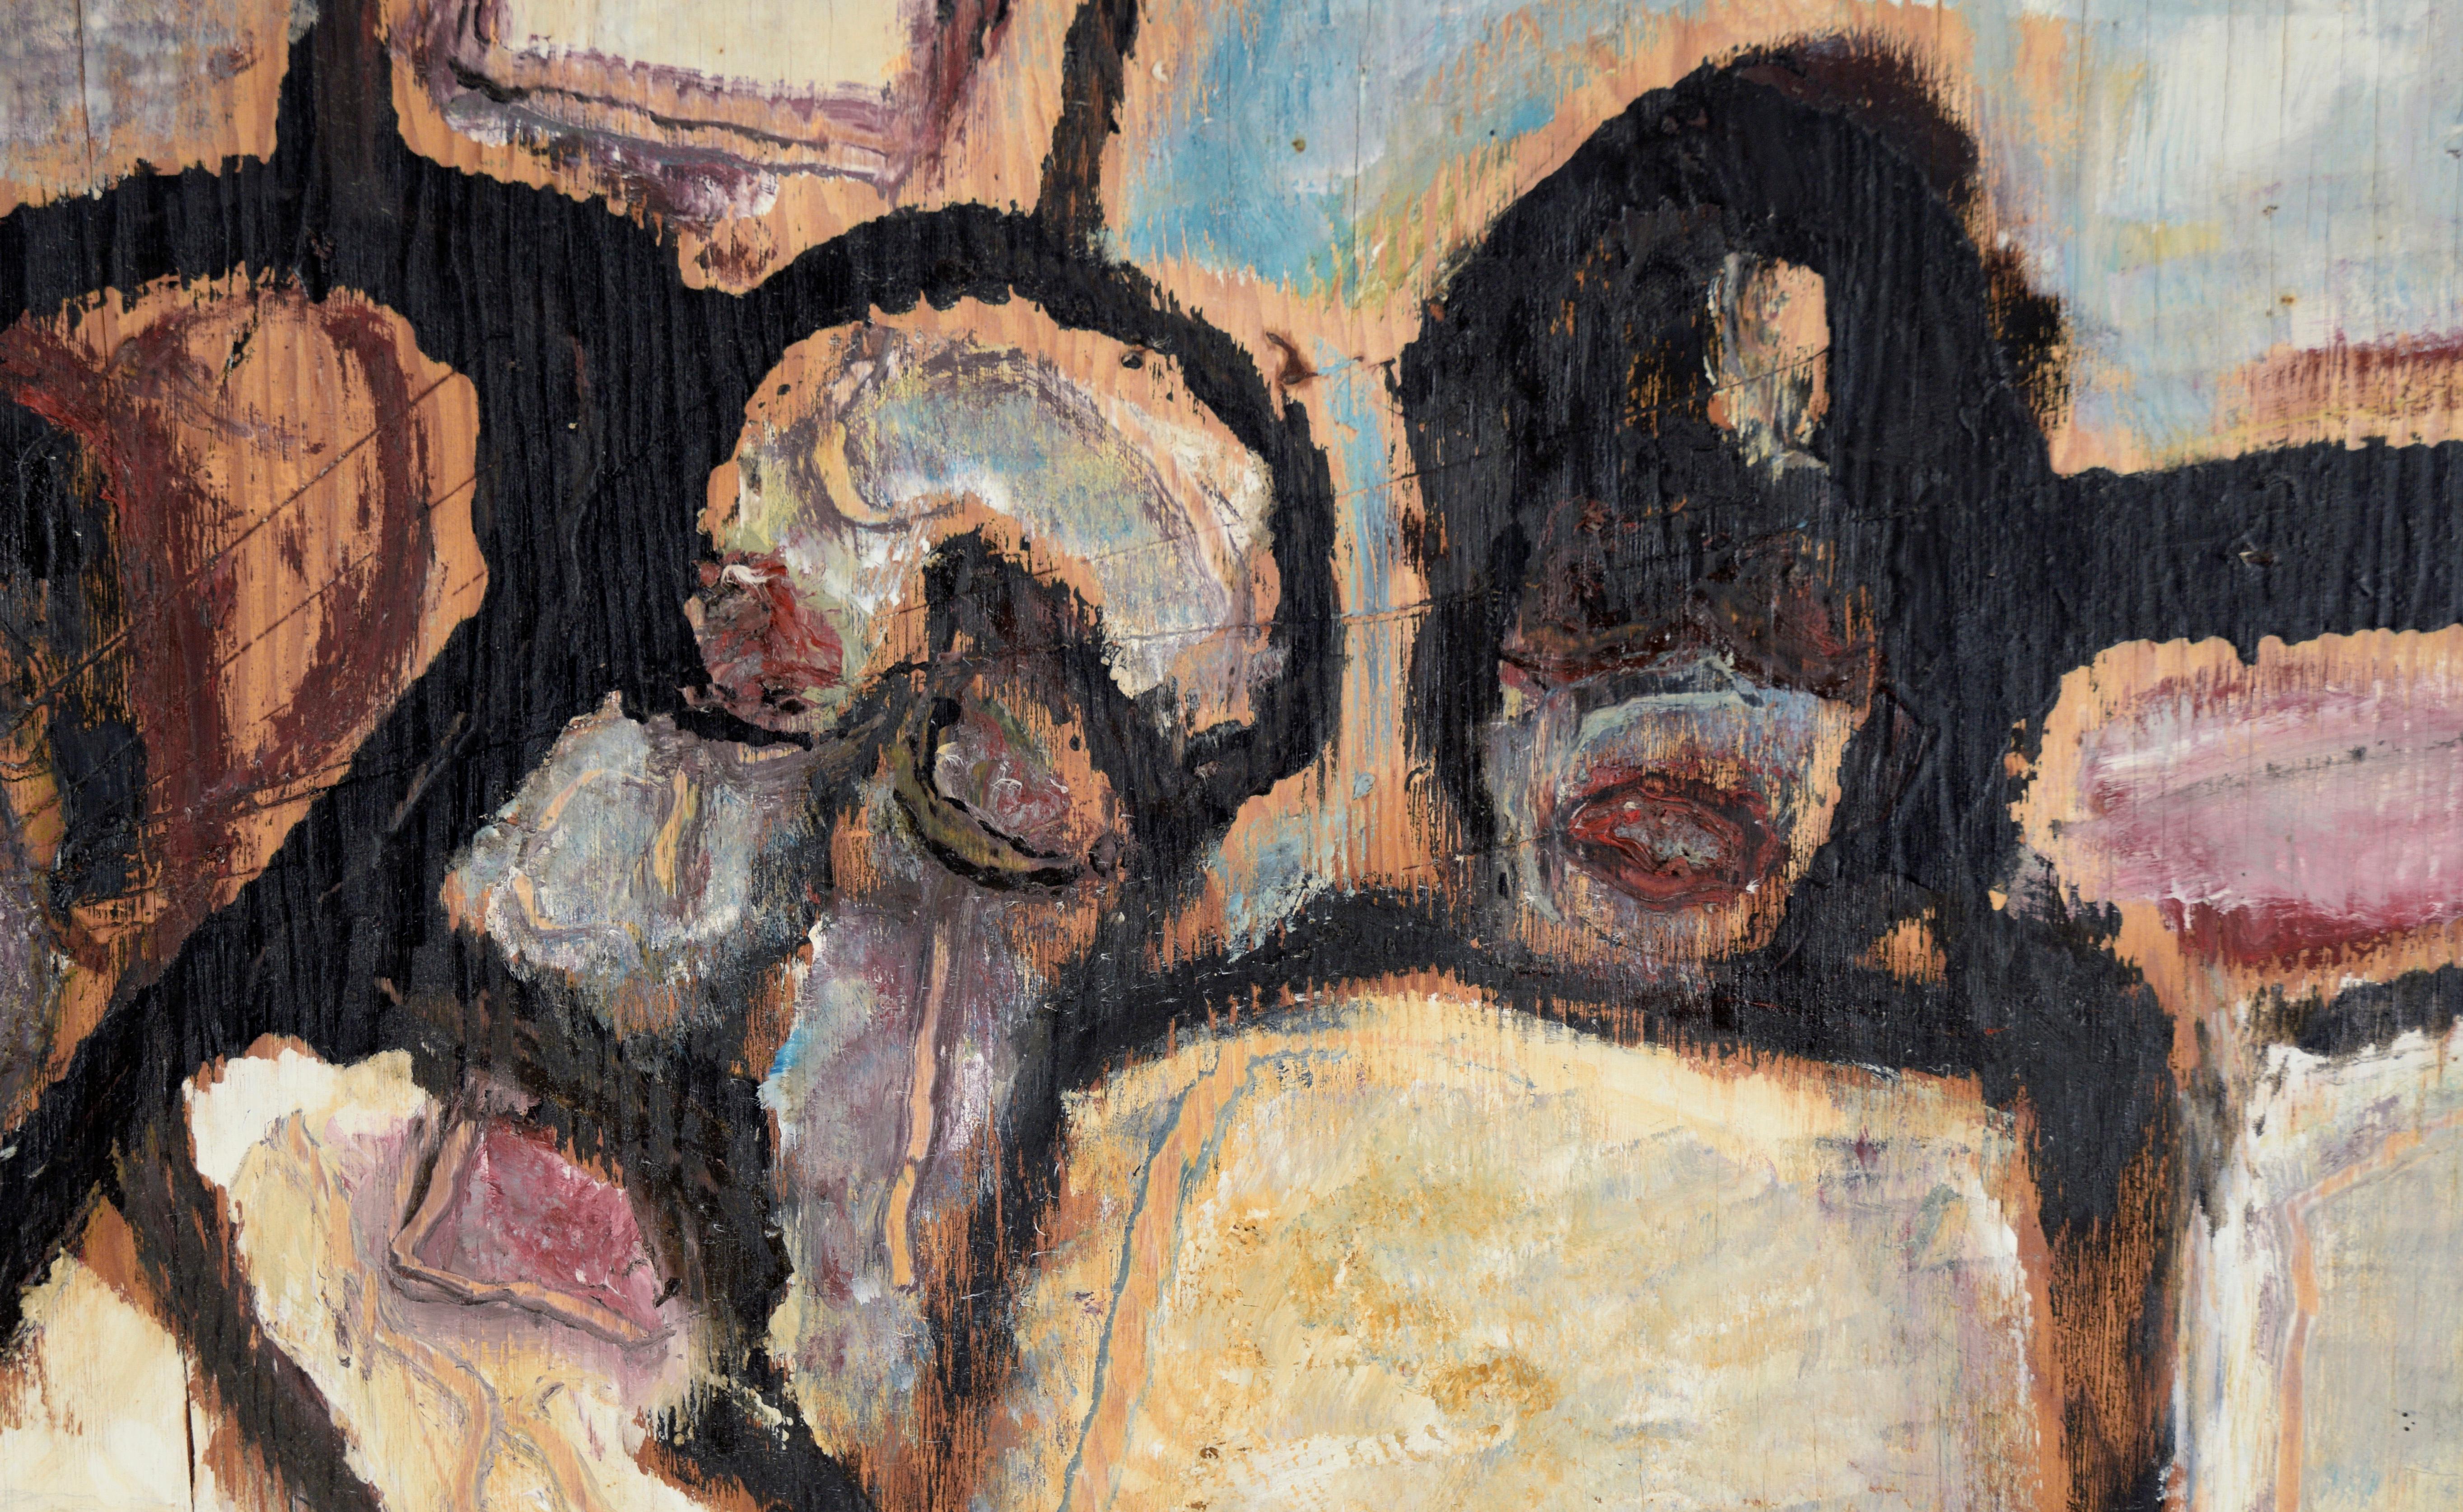 Faces on the Bus San Francisco Abstracted Figurative Composition in Oil on Board 2